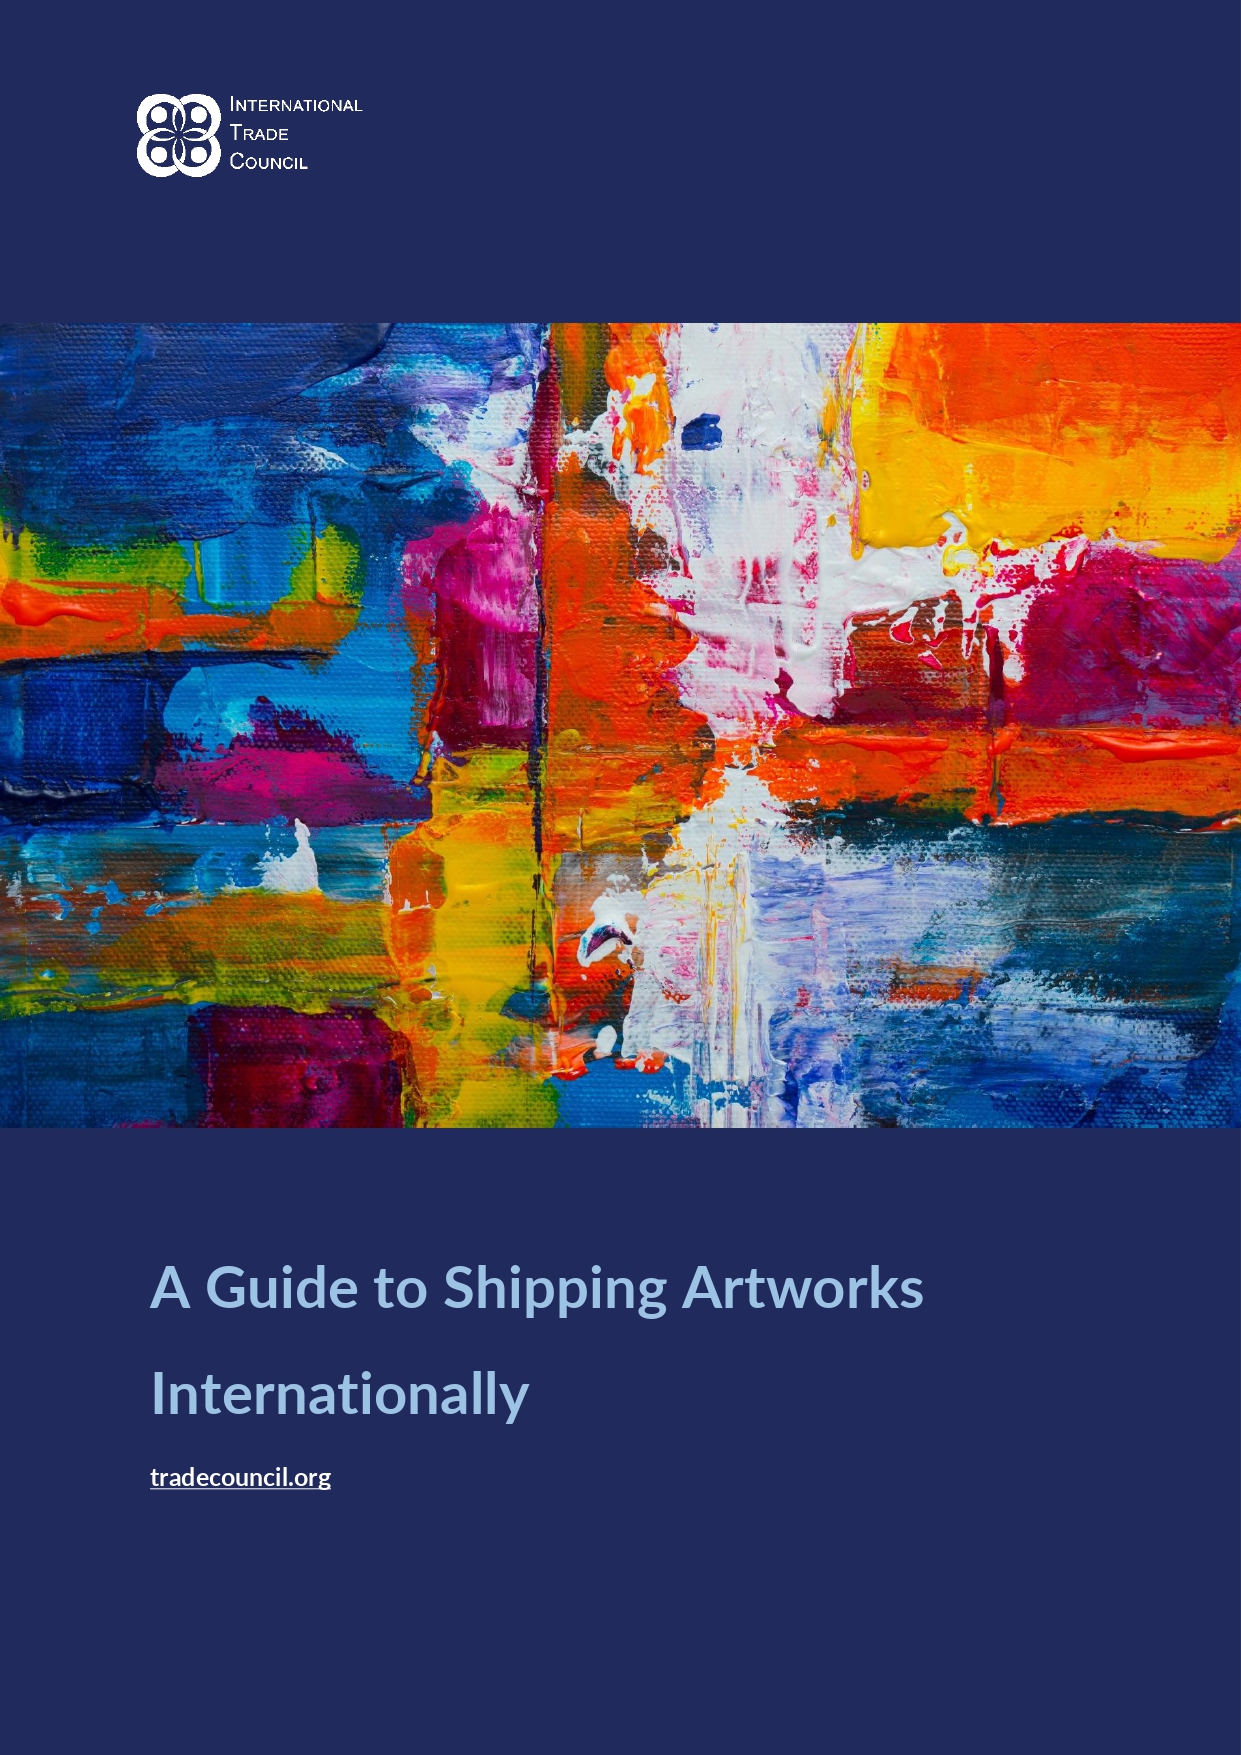 Shipping Artworks Internationally from the International Trade Council your international chamber of commerce.